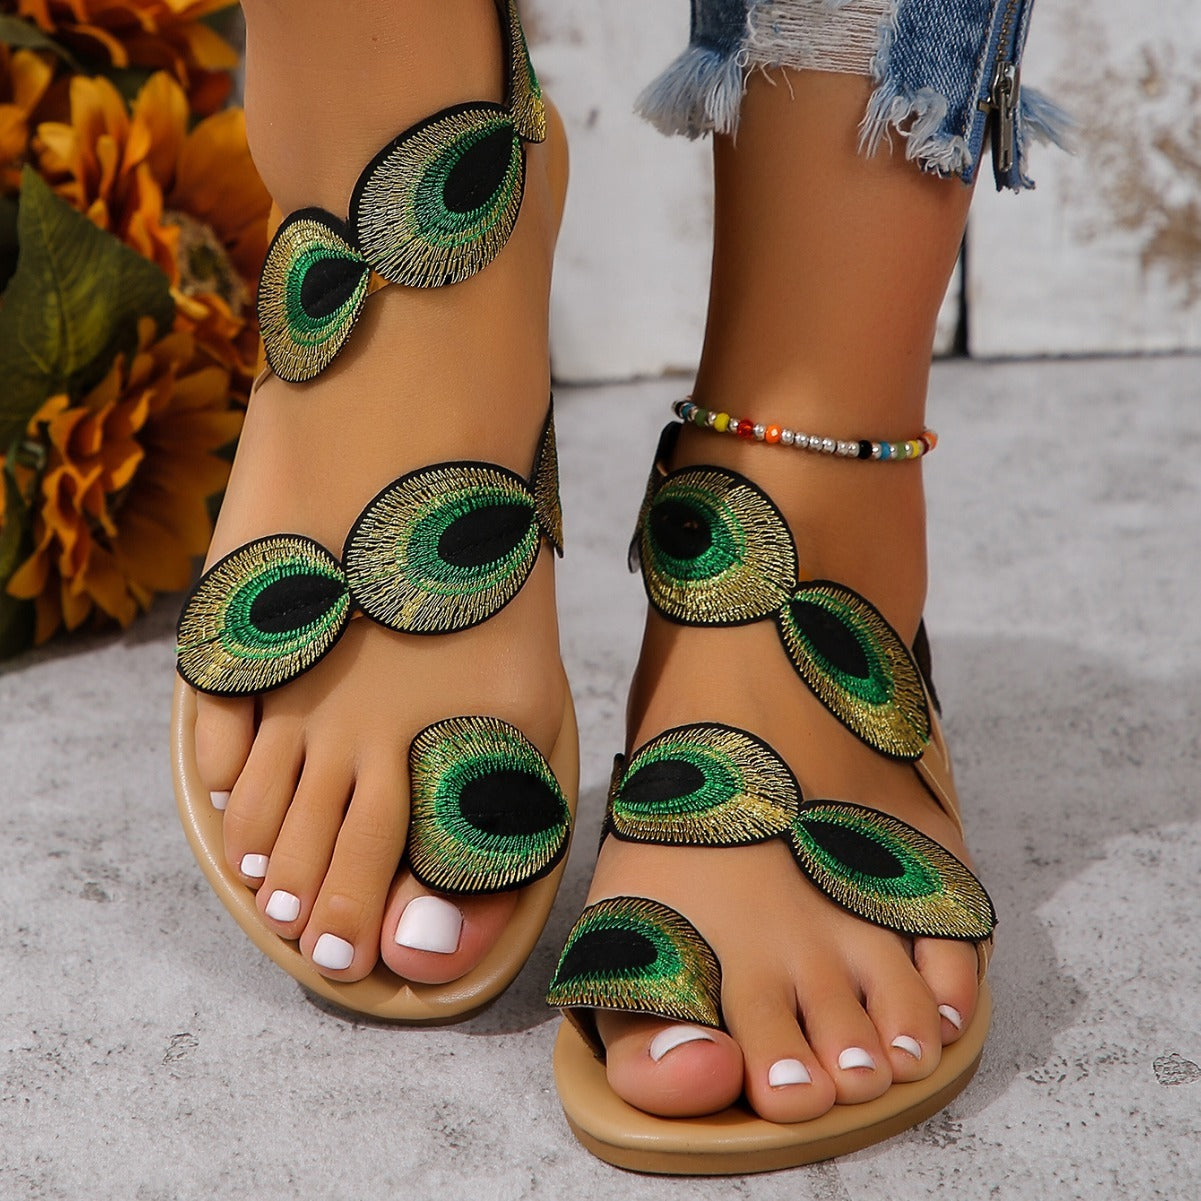 Fashion Peacock Embroidery Pattern Flat Sandals Summer Vacation Casual Clip Toe Beach Shoes For Women